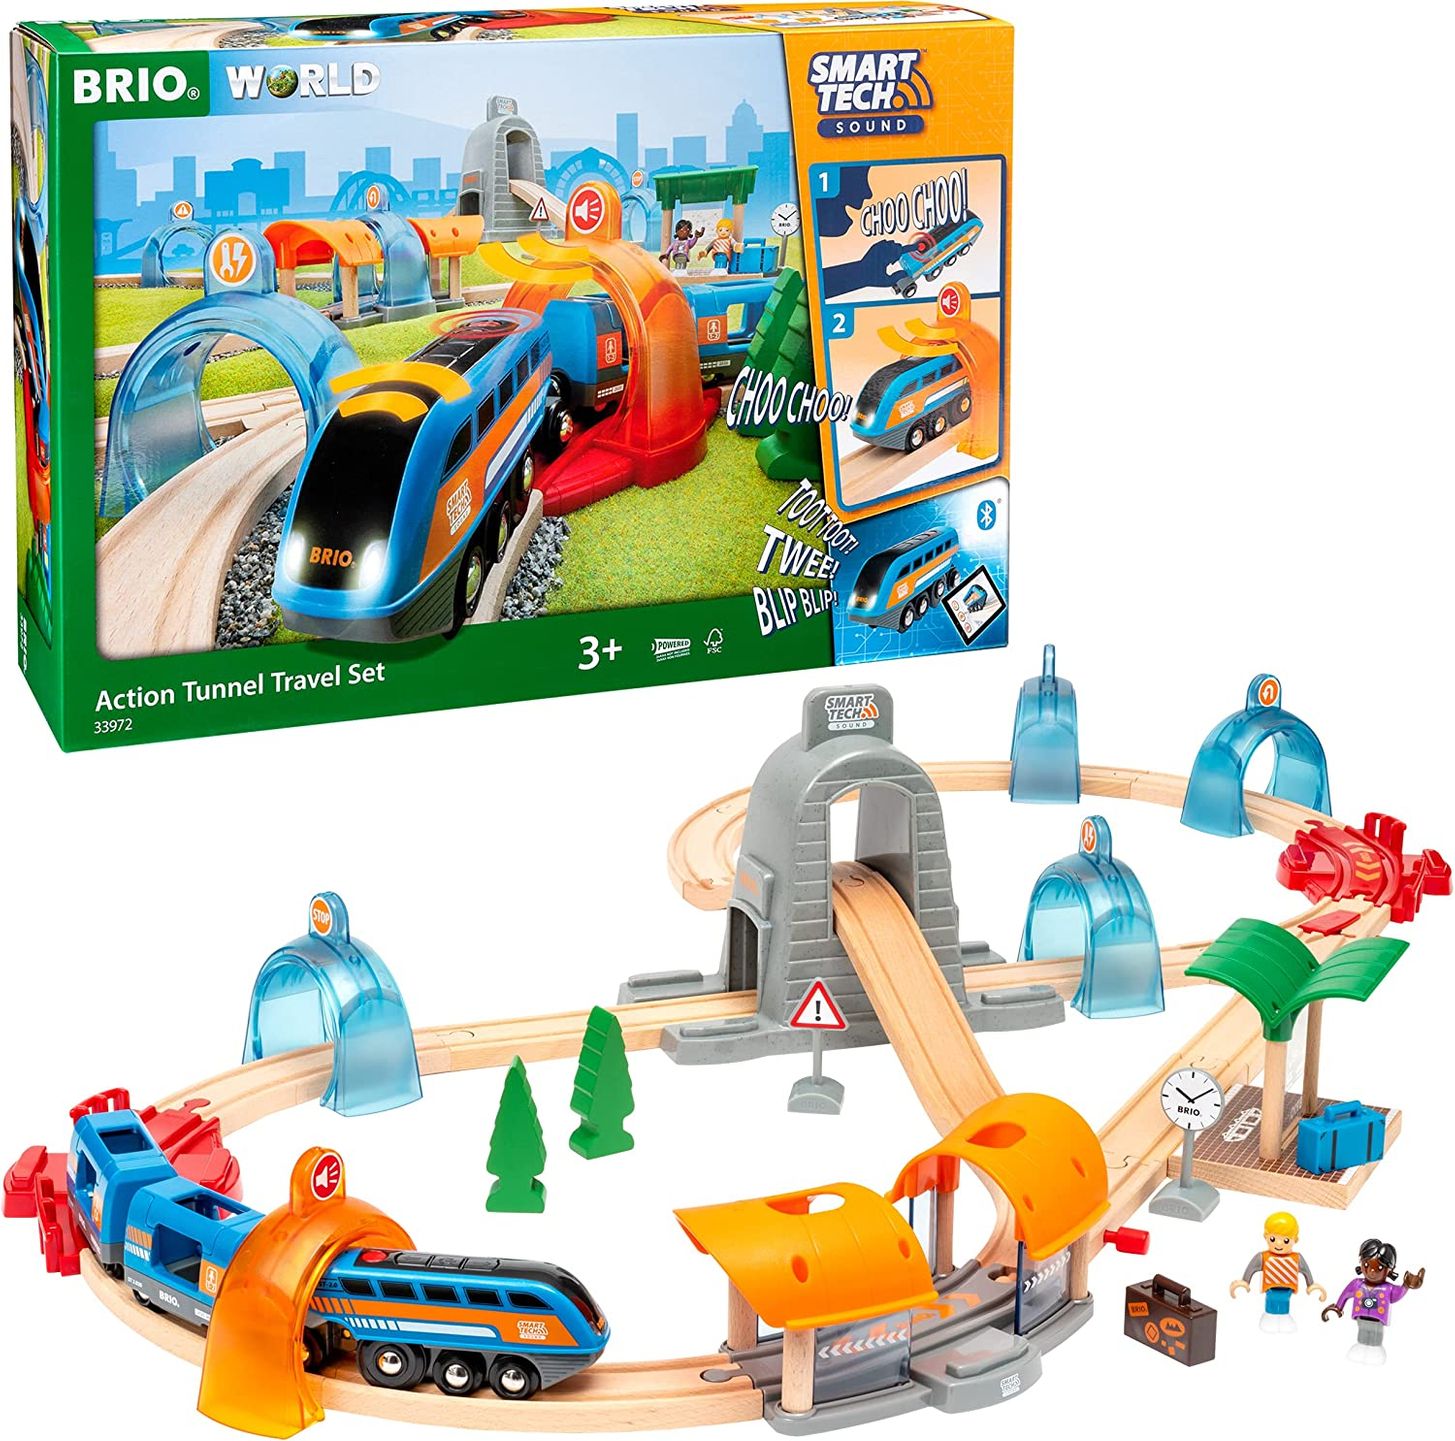 Top 5 Best toys For Children in the world Available at /Link